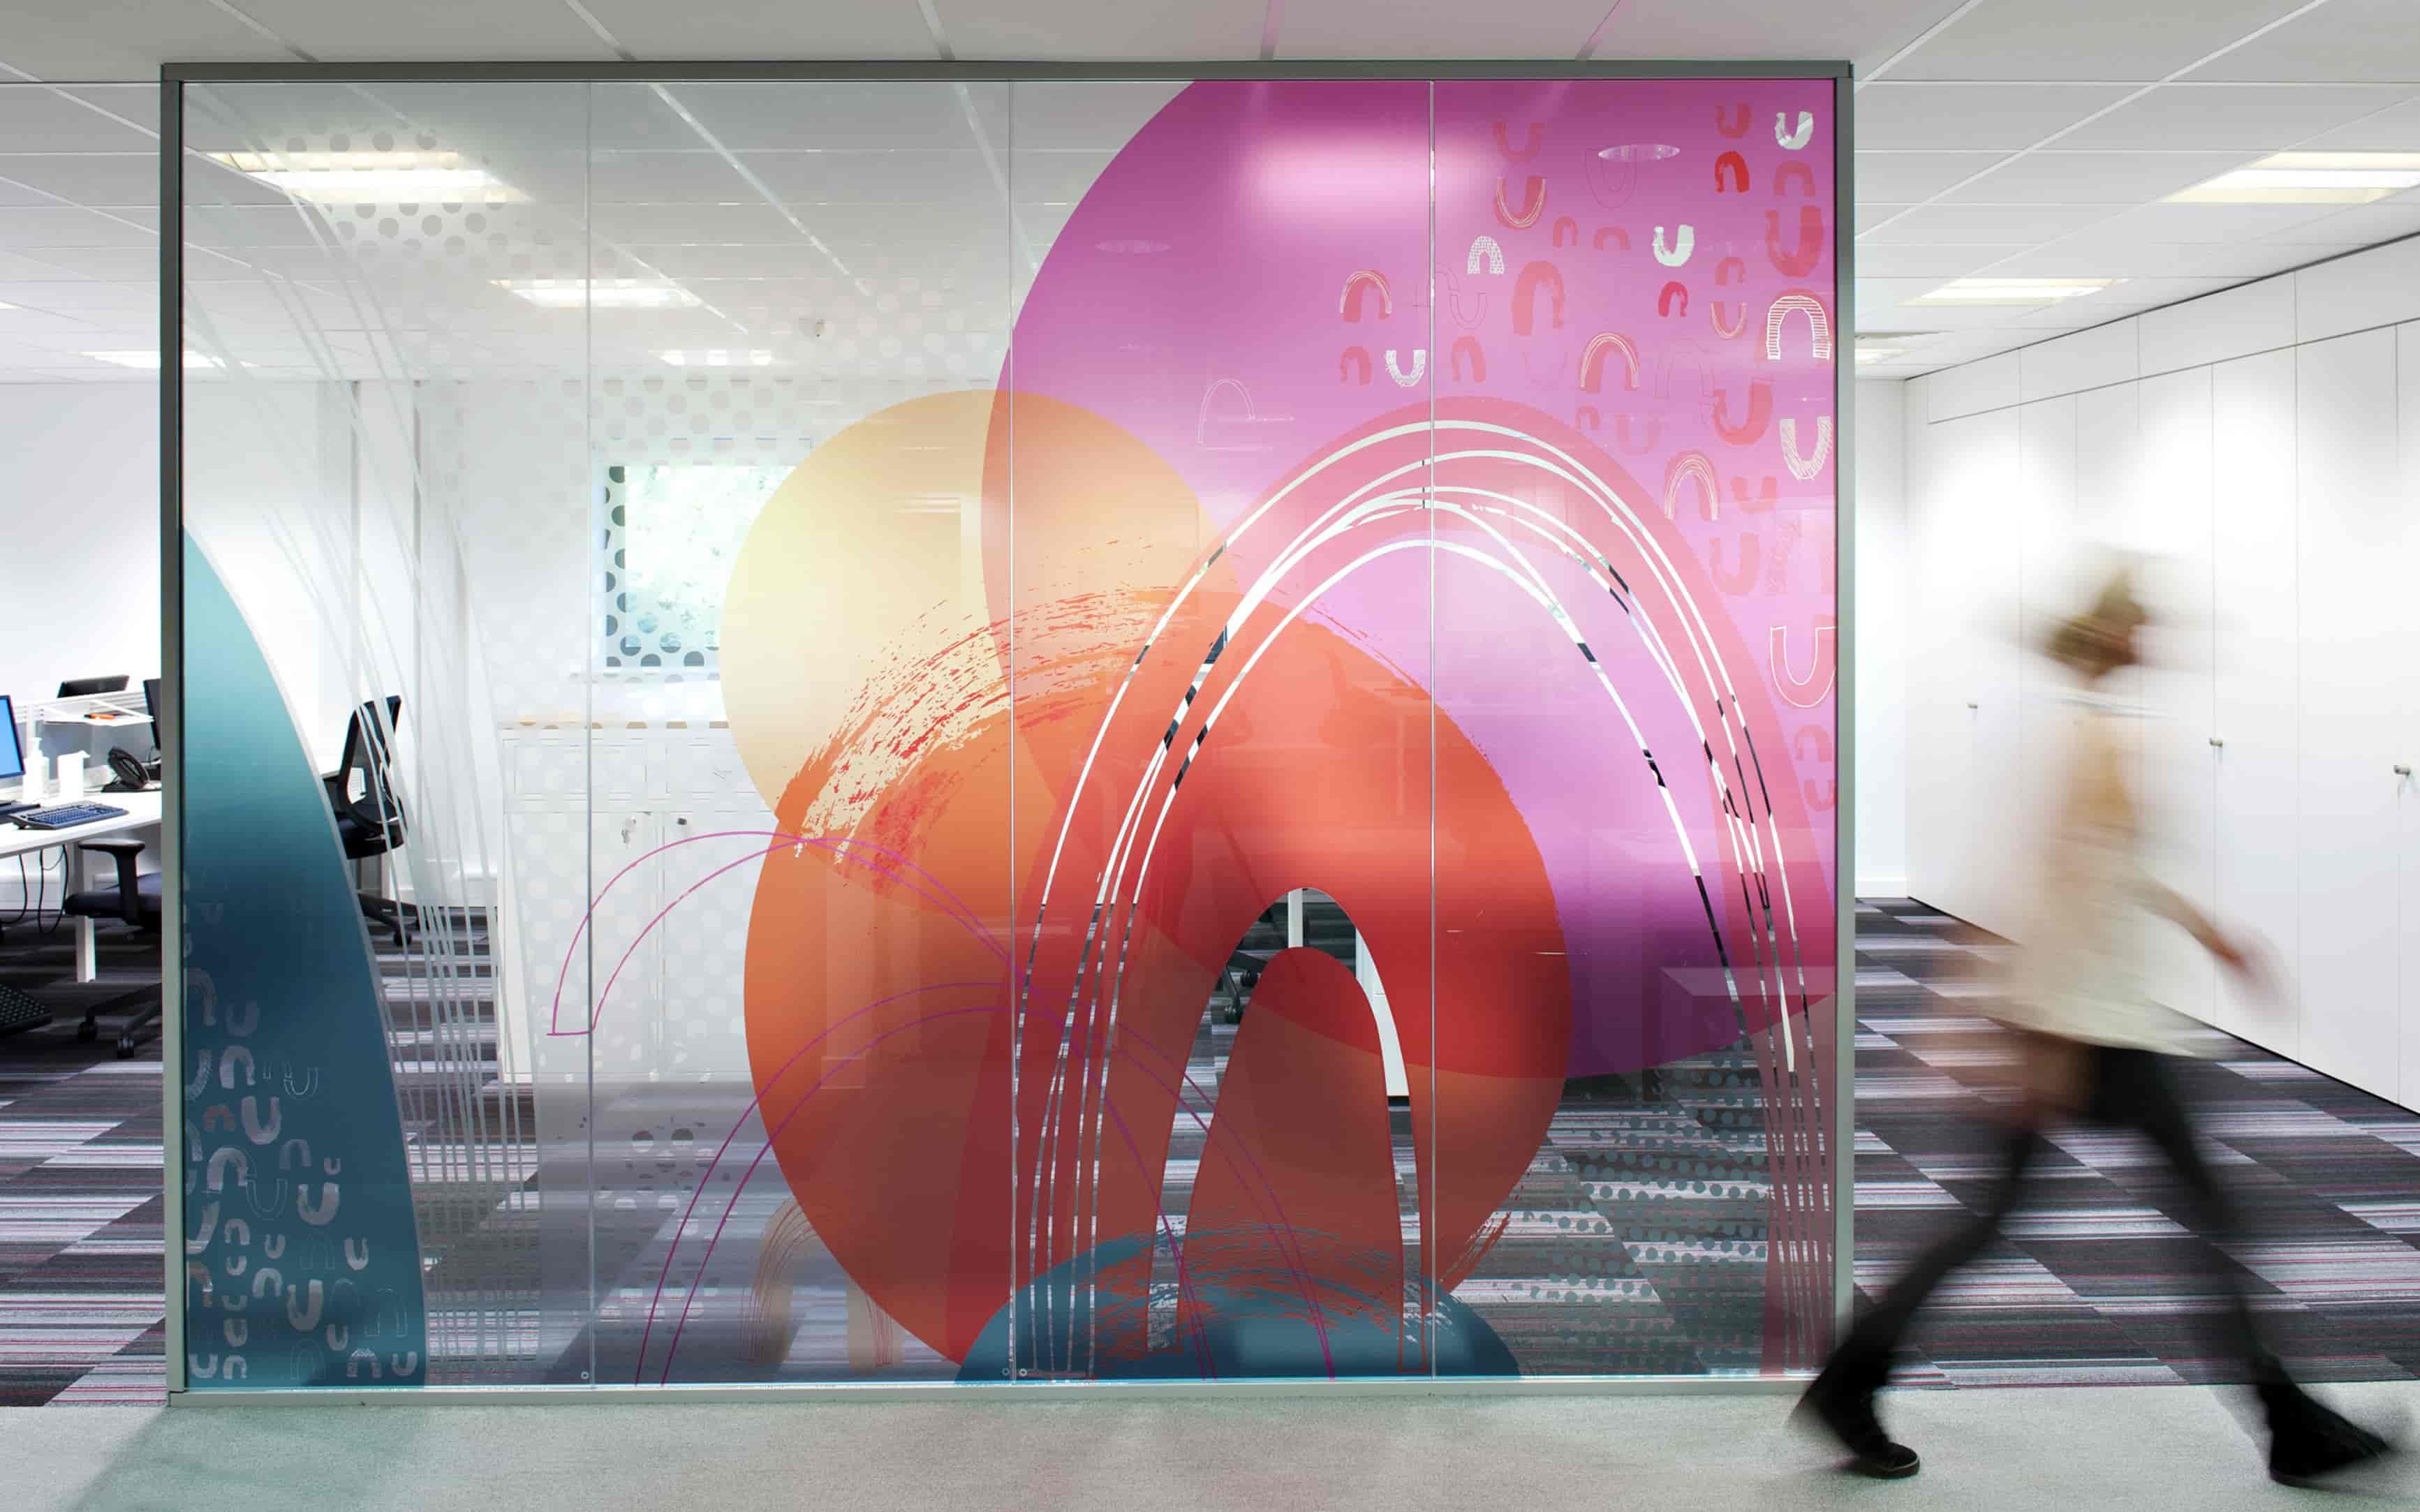 A beautiful printed film on a glass divider